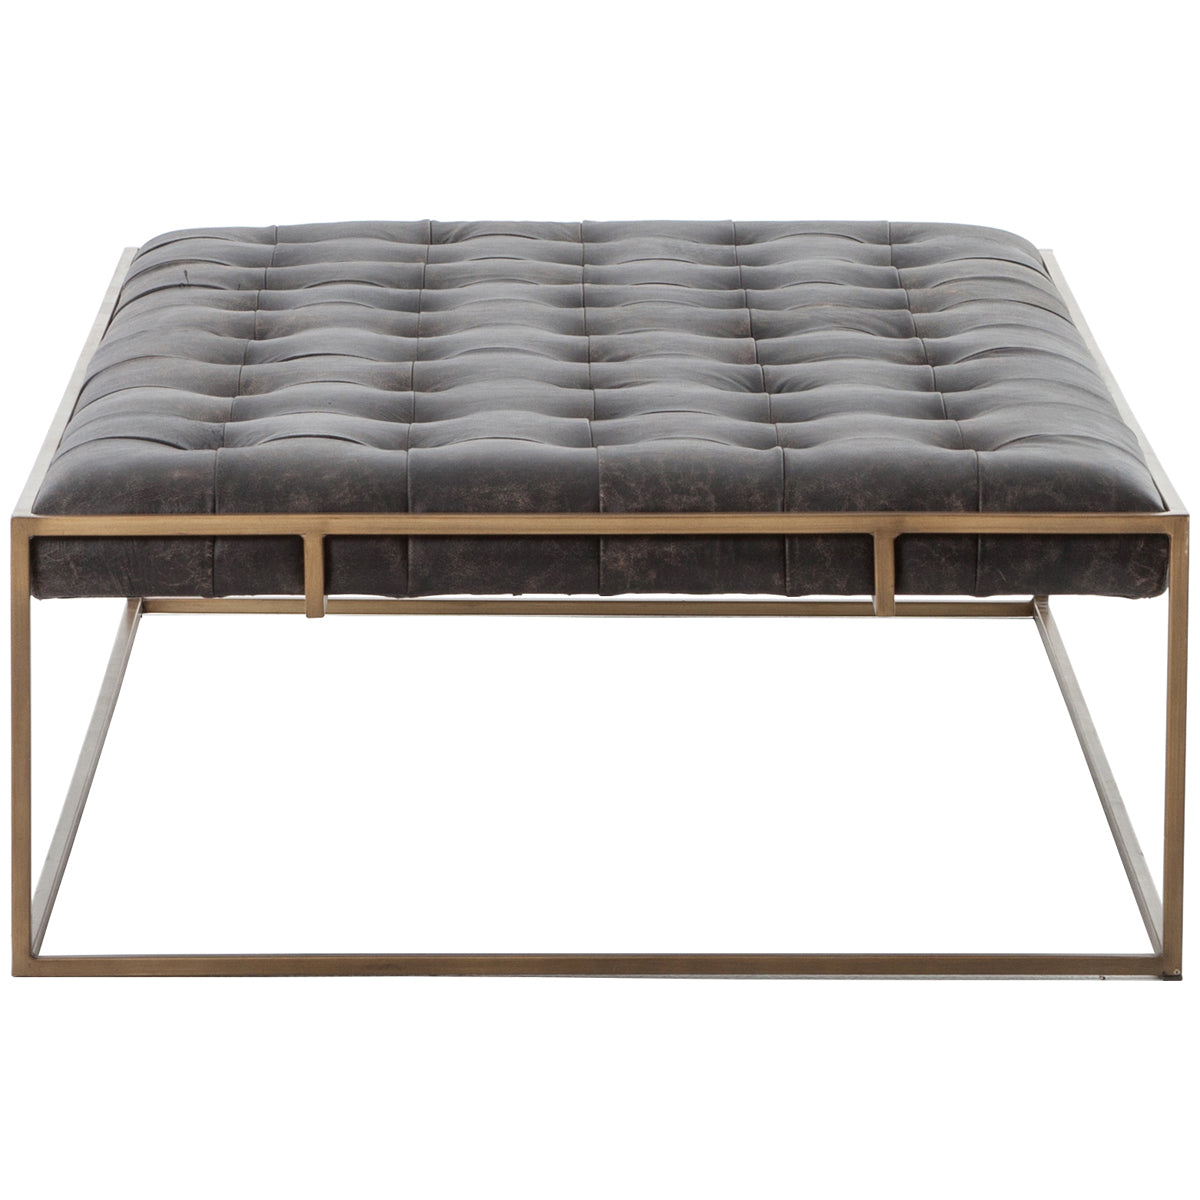 Four Hands Irondale Oxford Coffee Table